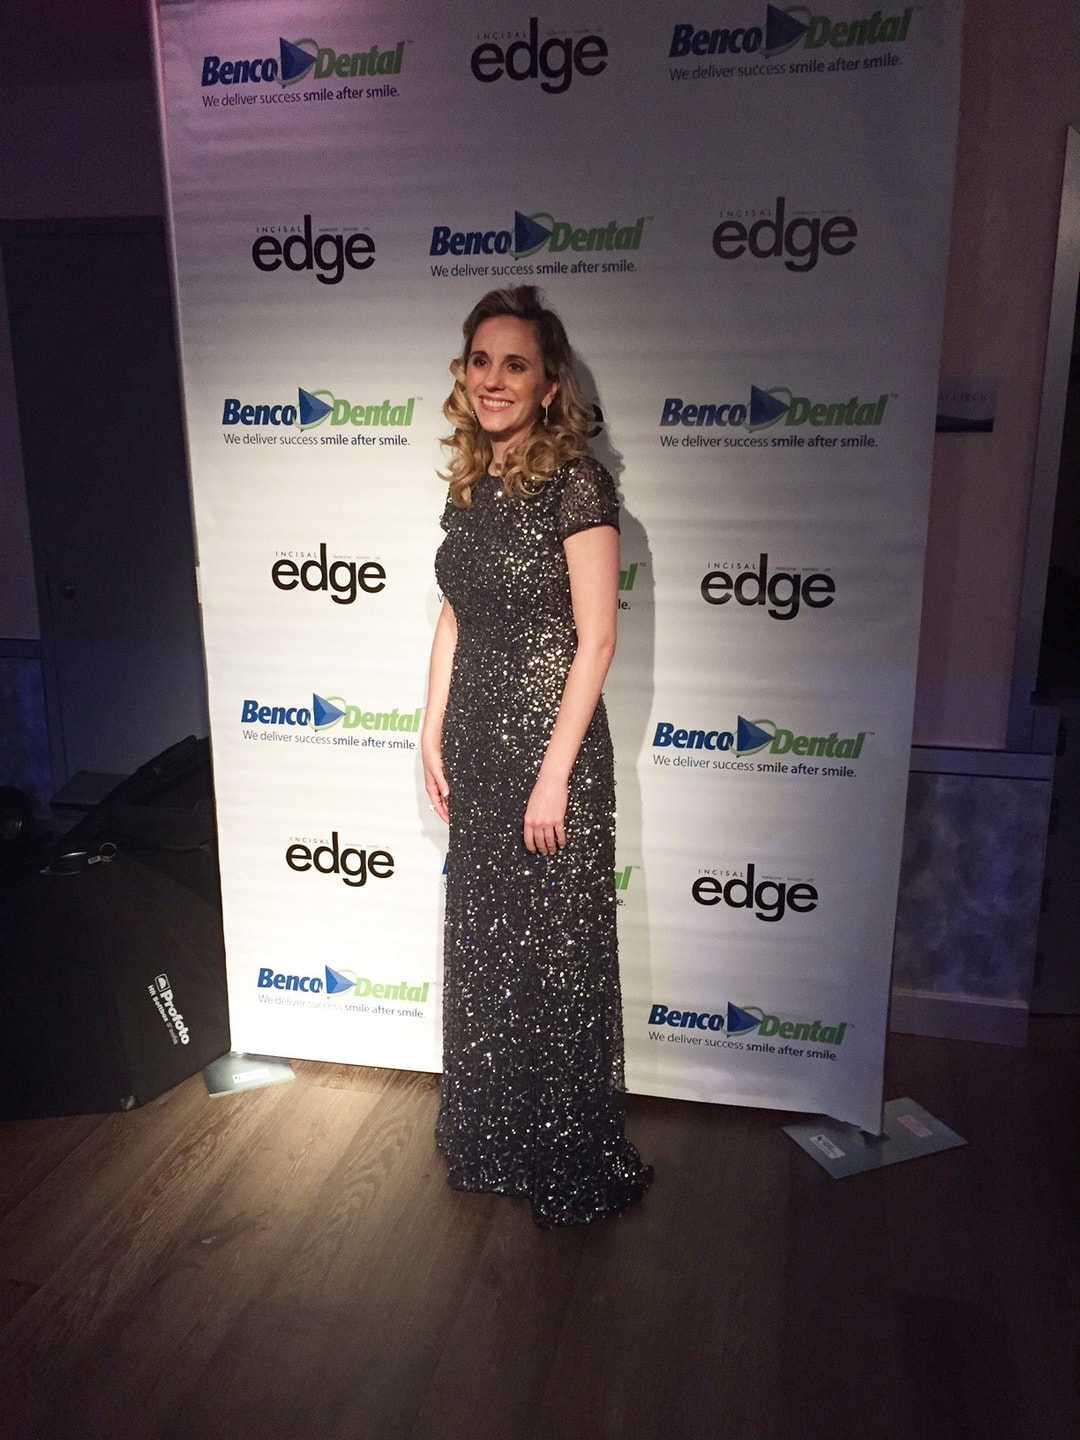 Incisal Edge 40 Under 40 honoree Dr. Stephanie Swords in NYC from Texas just long enough for her moment in the spotlight.